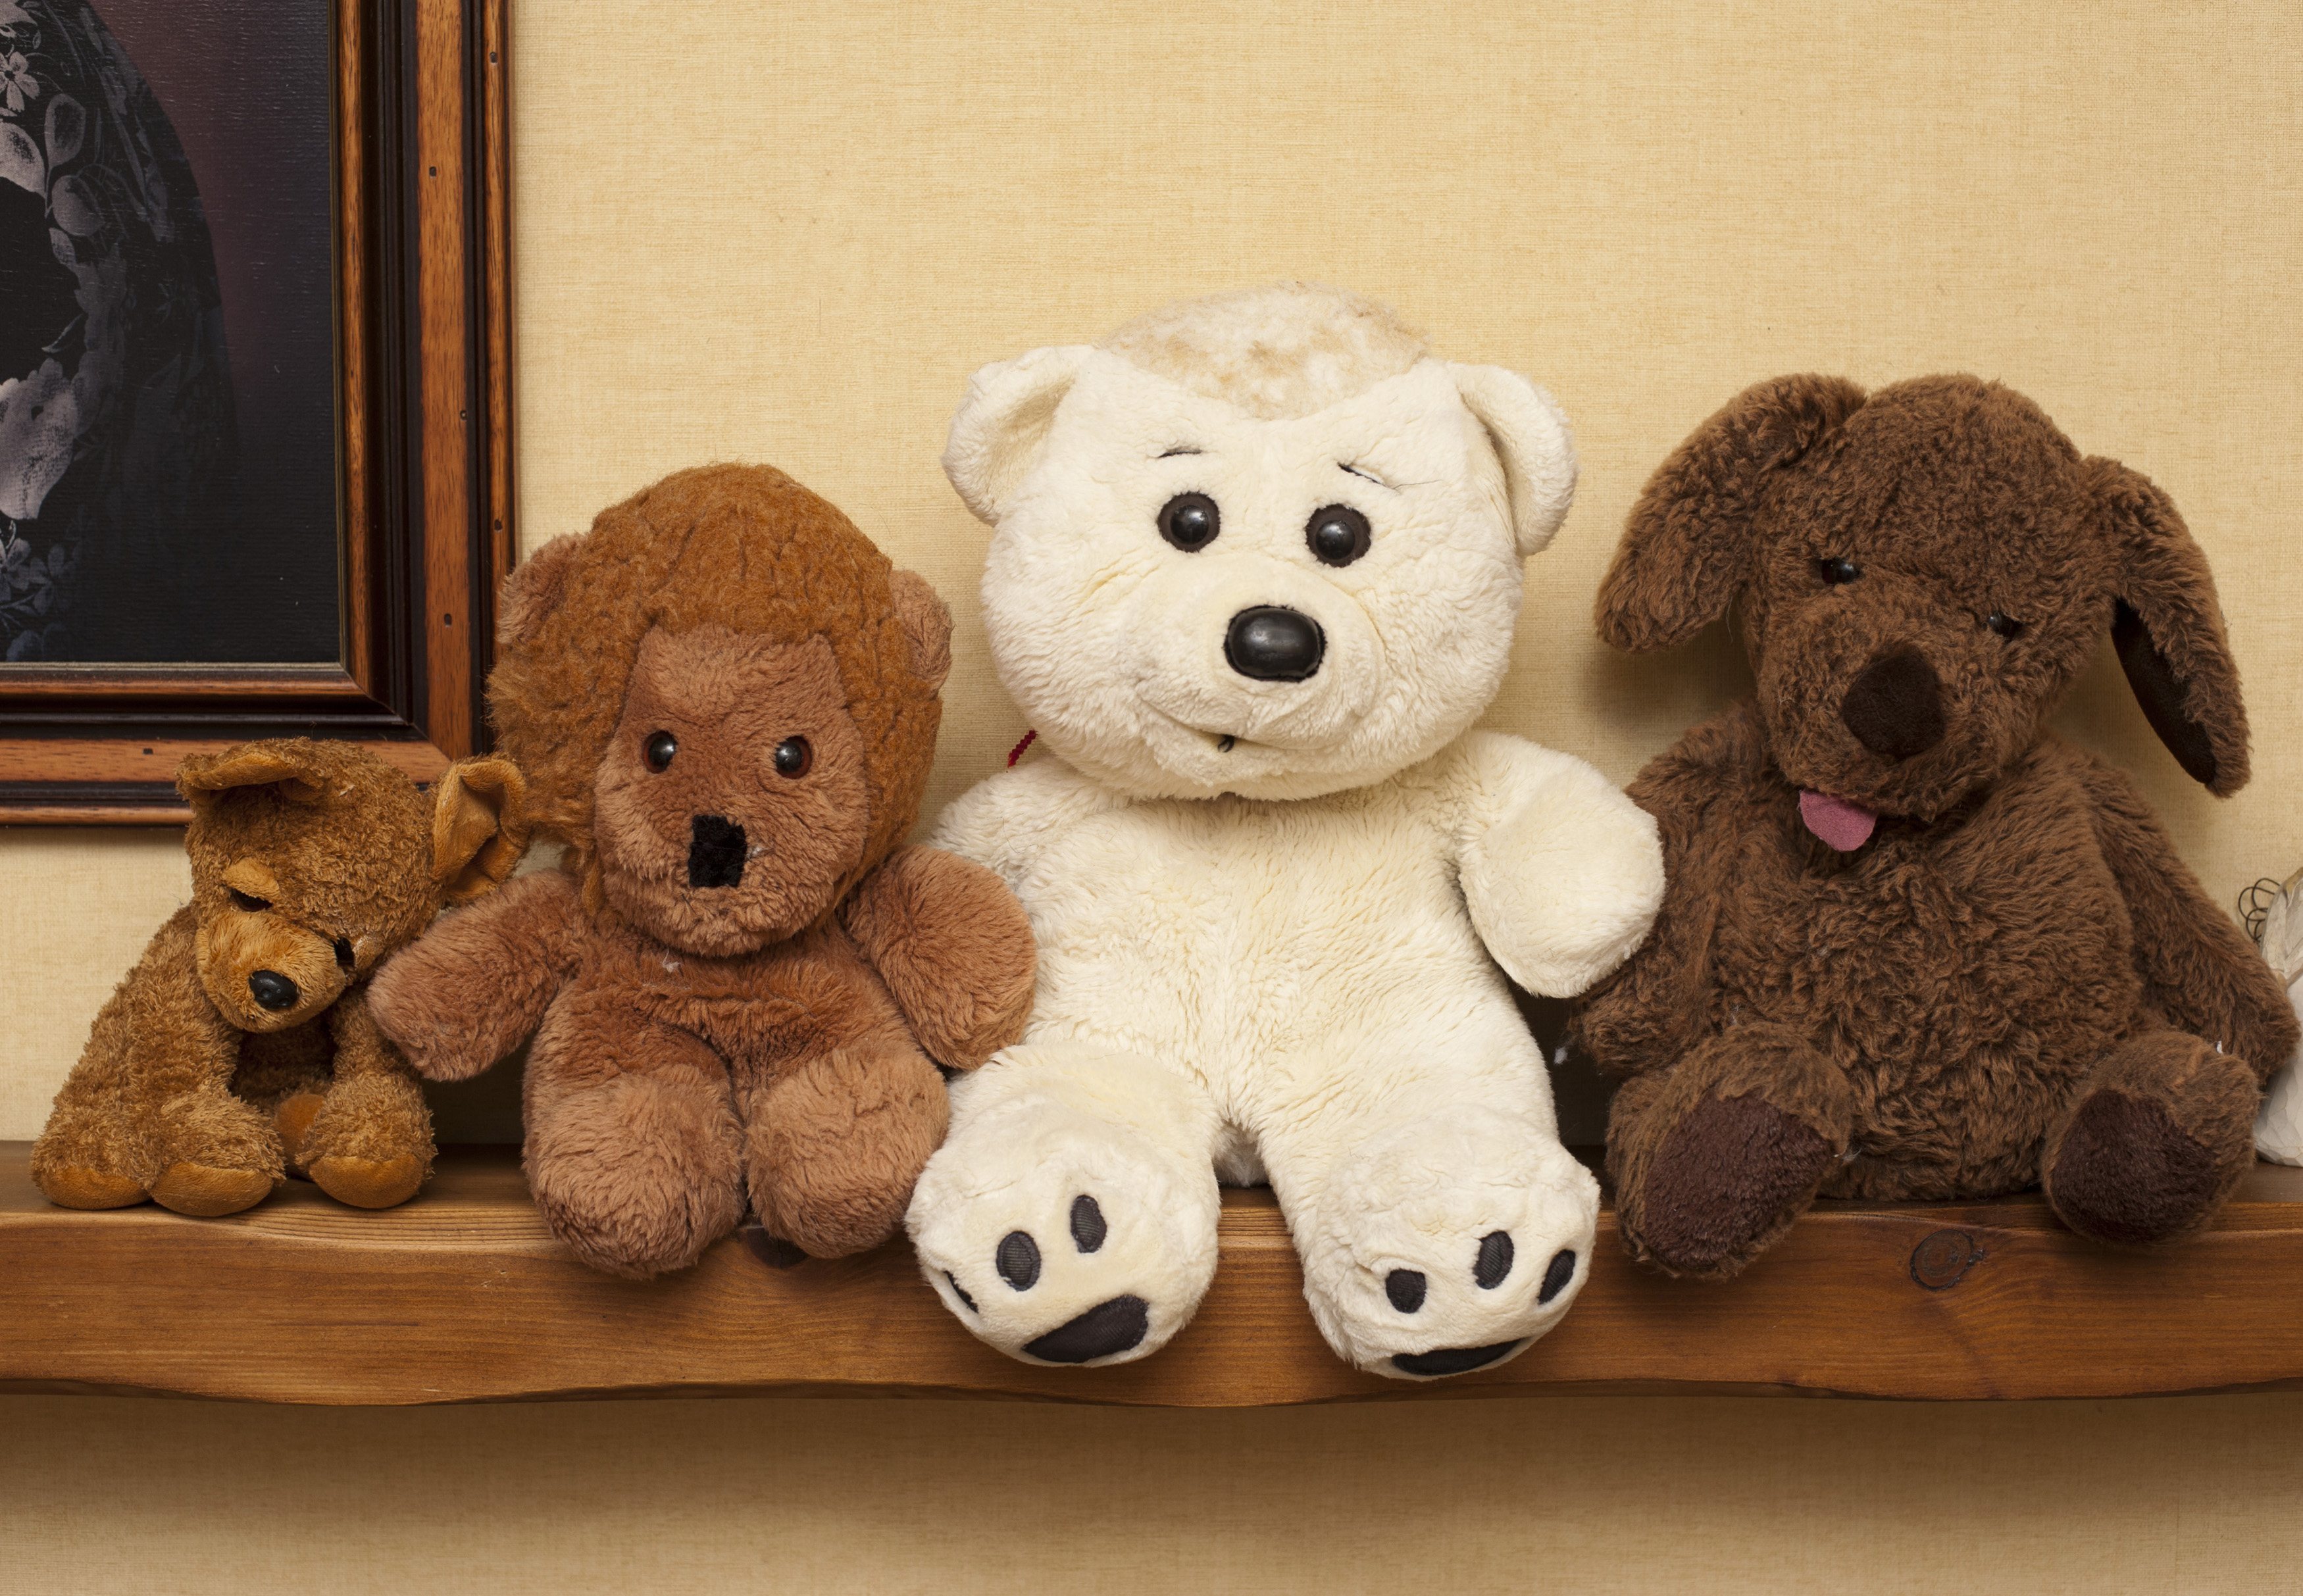 Free Stock Photo 11976 Row of assorted soft plush toys on 